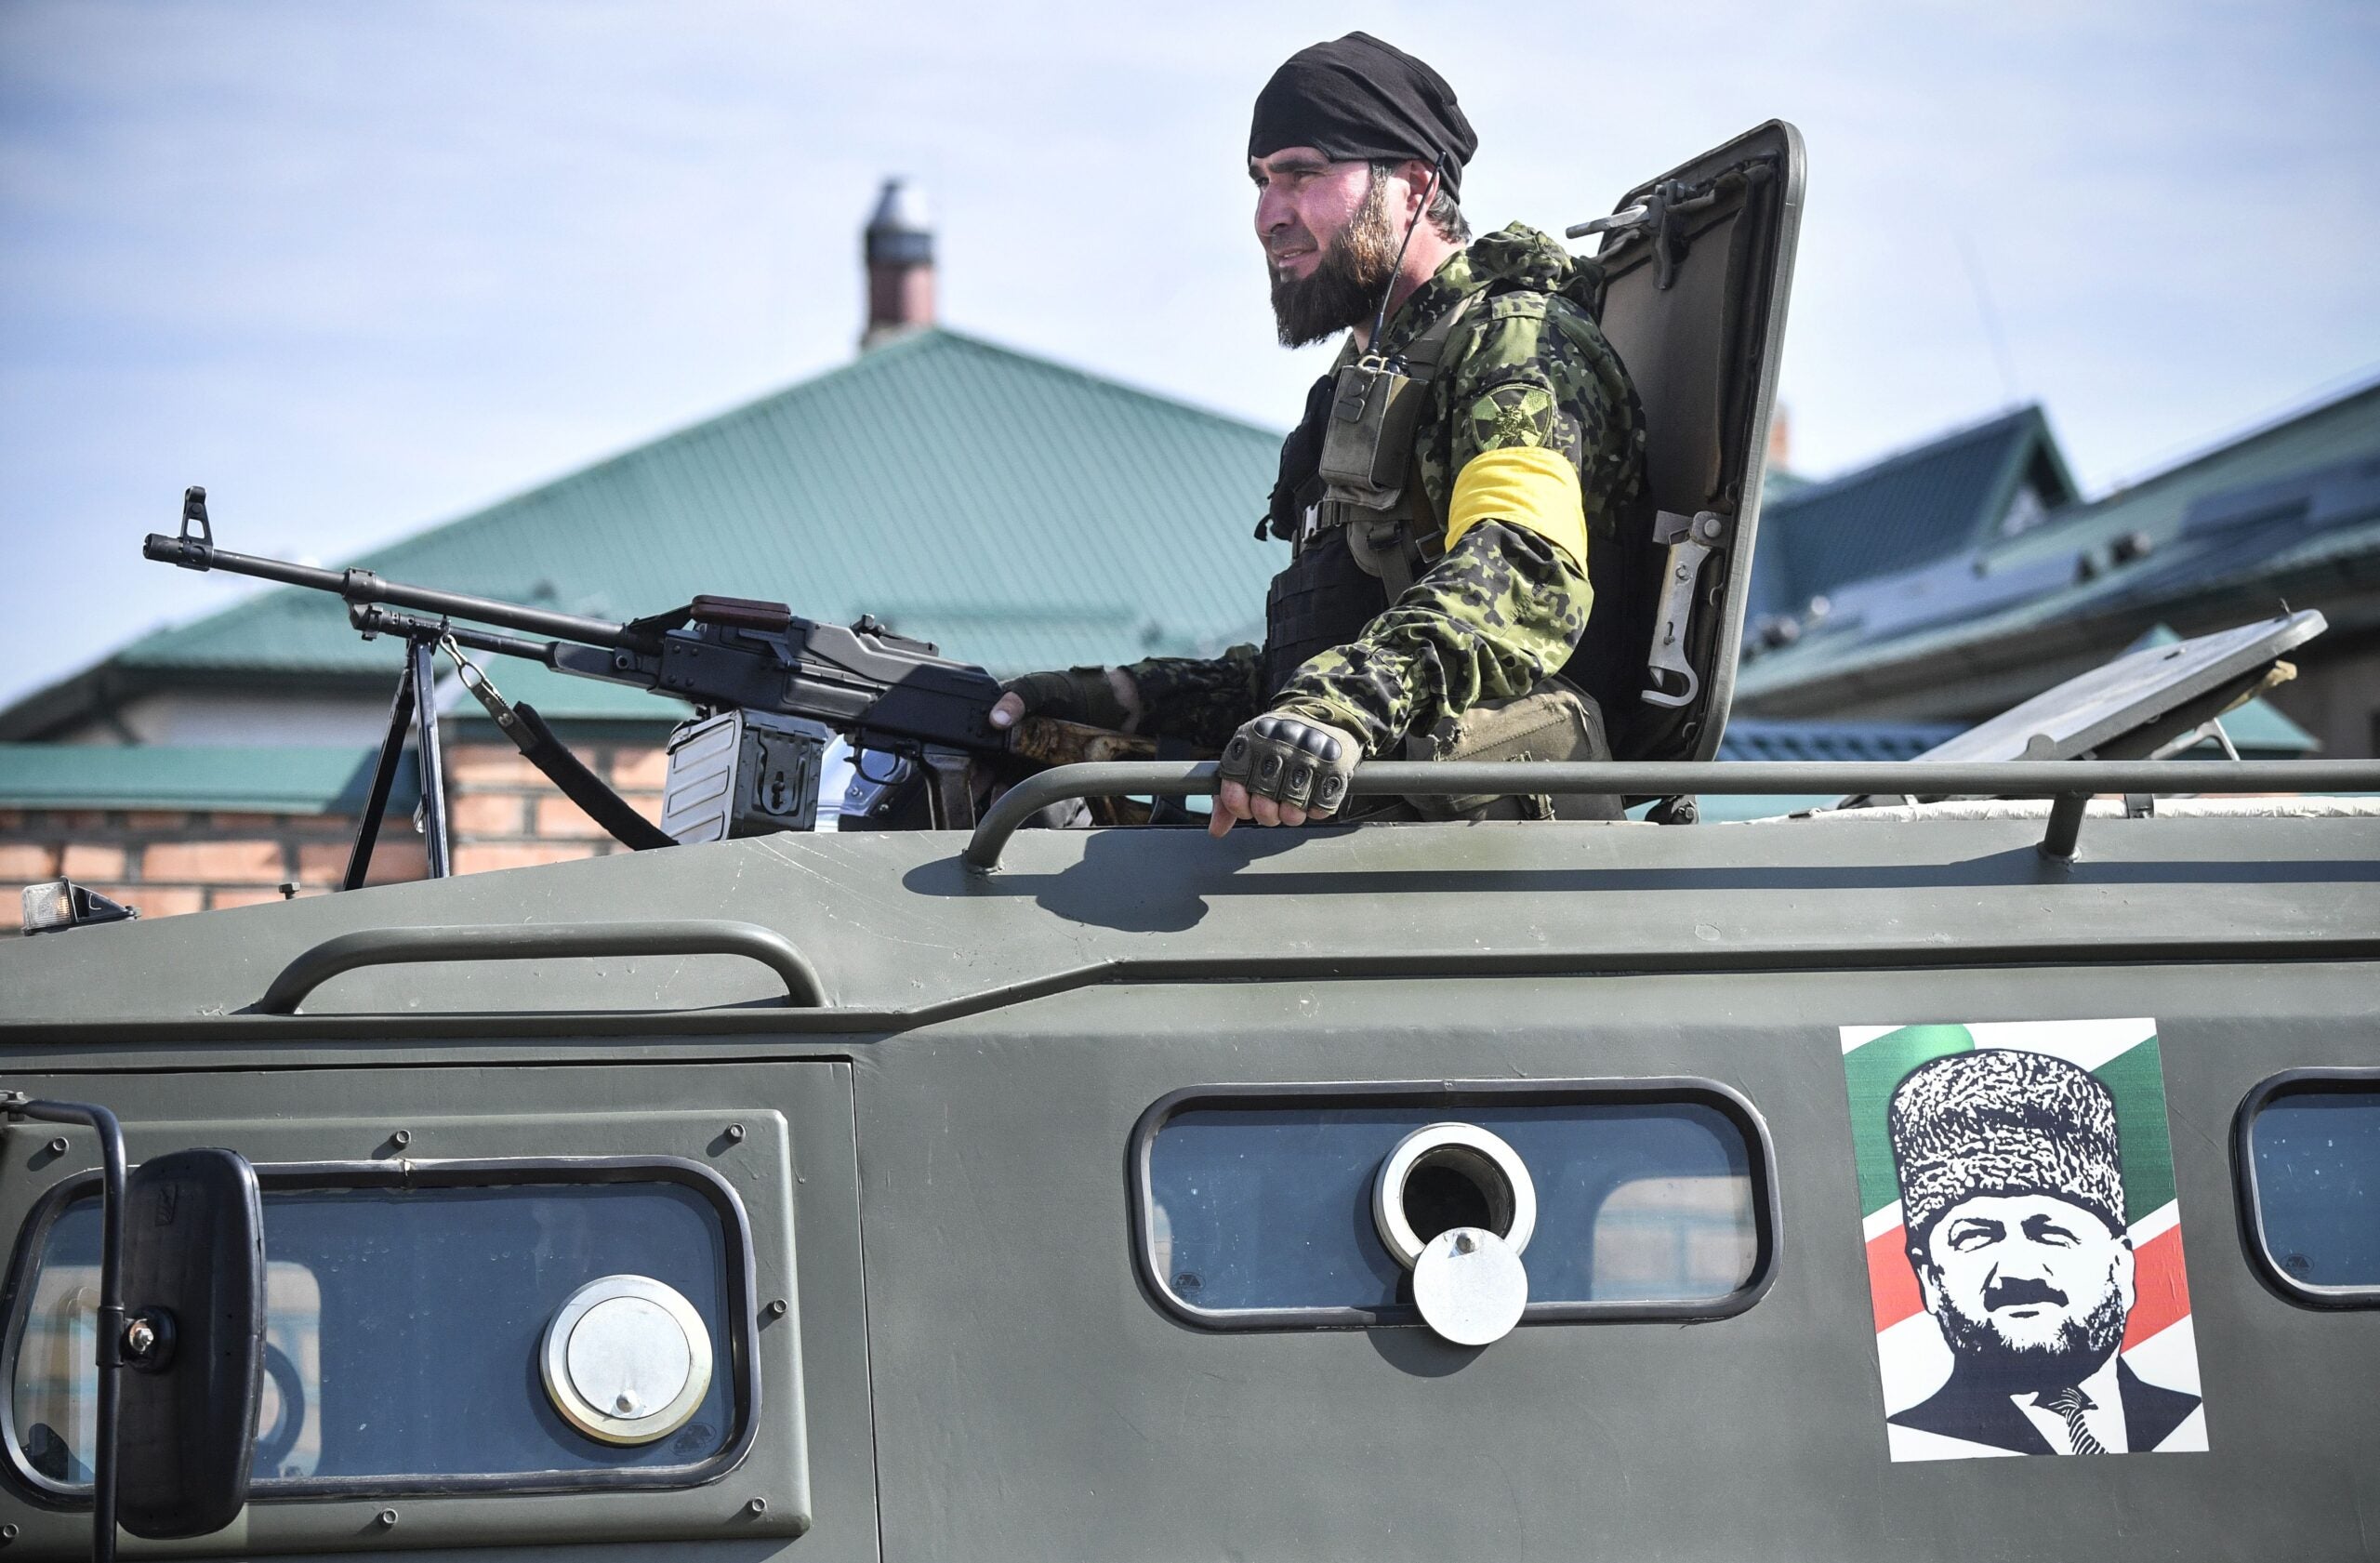 A Chechen special force trooper sits atop an APC decorated with a portrait of former Chechen president Akhmad Kadyrov, the father of the current Chechen leader Ramzan Kadyrov, during a training session at a 'Russian Spetsnaz University' special force training centre in the town of Gudermes in Chechnya on July 25, 2019. (Photo by Alexander NEMENOV / AFP)        (Photo credit should read ALEXANDER NEMENOV/AFP via Getty Images)